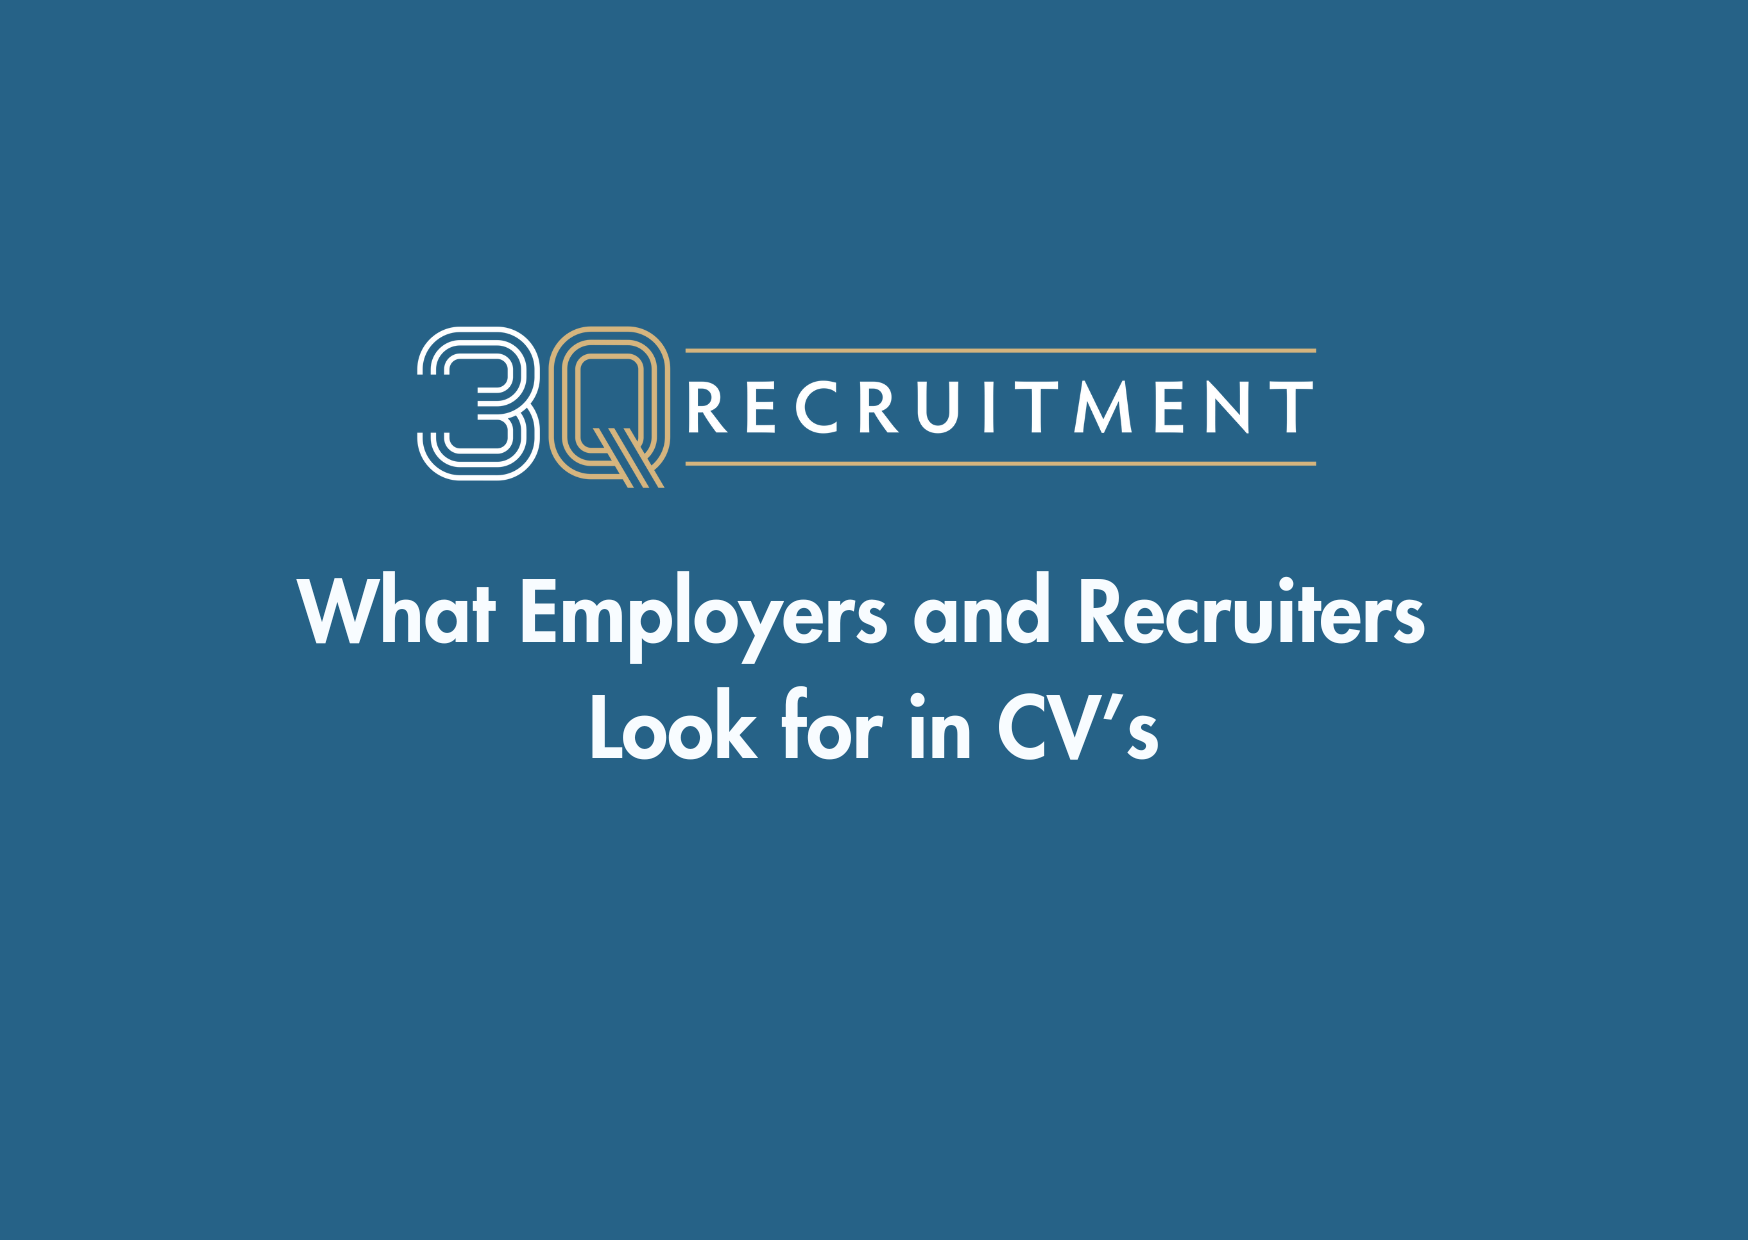 3Q Recruitment What Employers and Recruiters Look for in CV’s